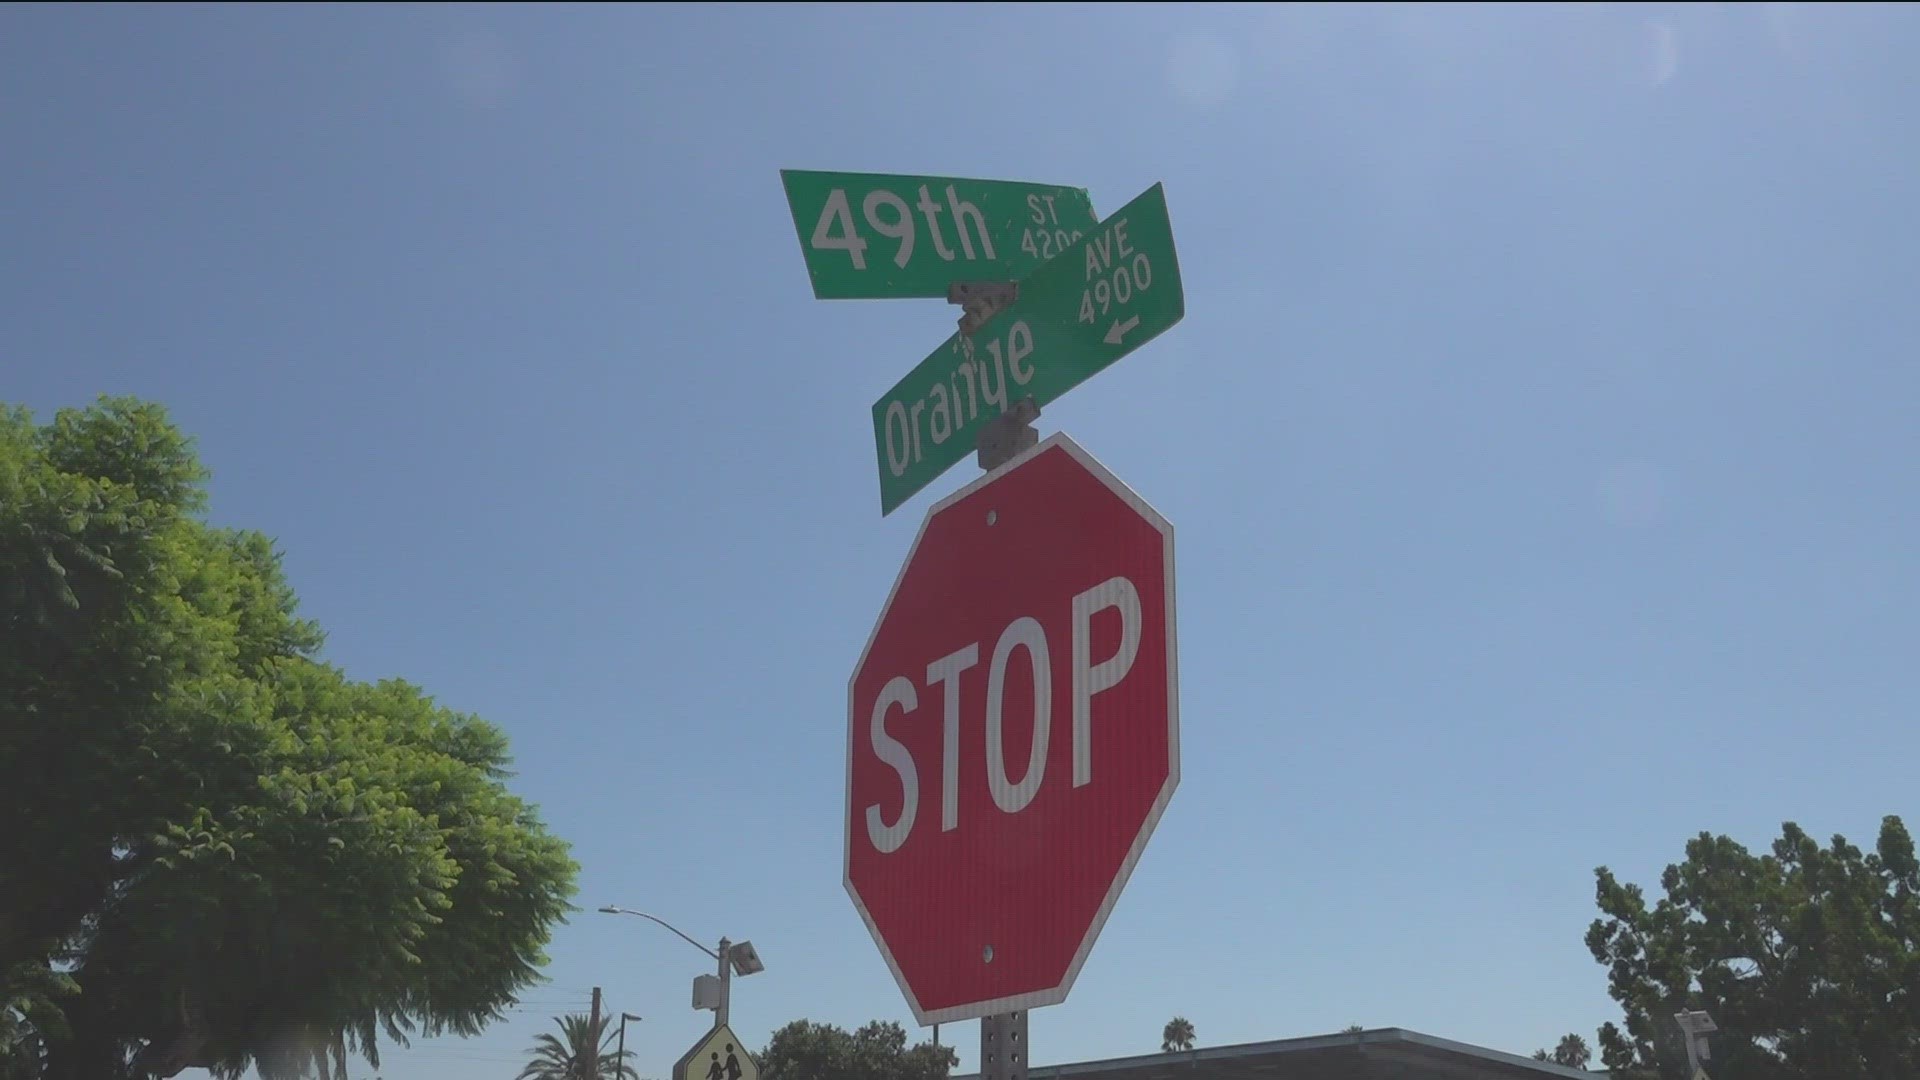 People in the neighborhood say the crosswalk at the problematic intersection needs a crossing guard. They say it's also dangerous at Orange and Estrella Avenue.